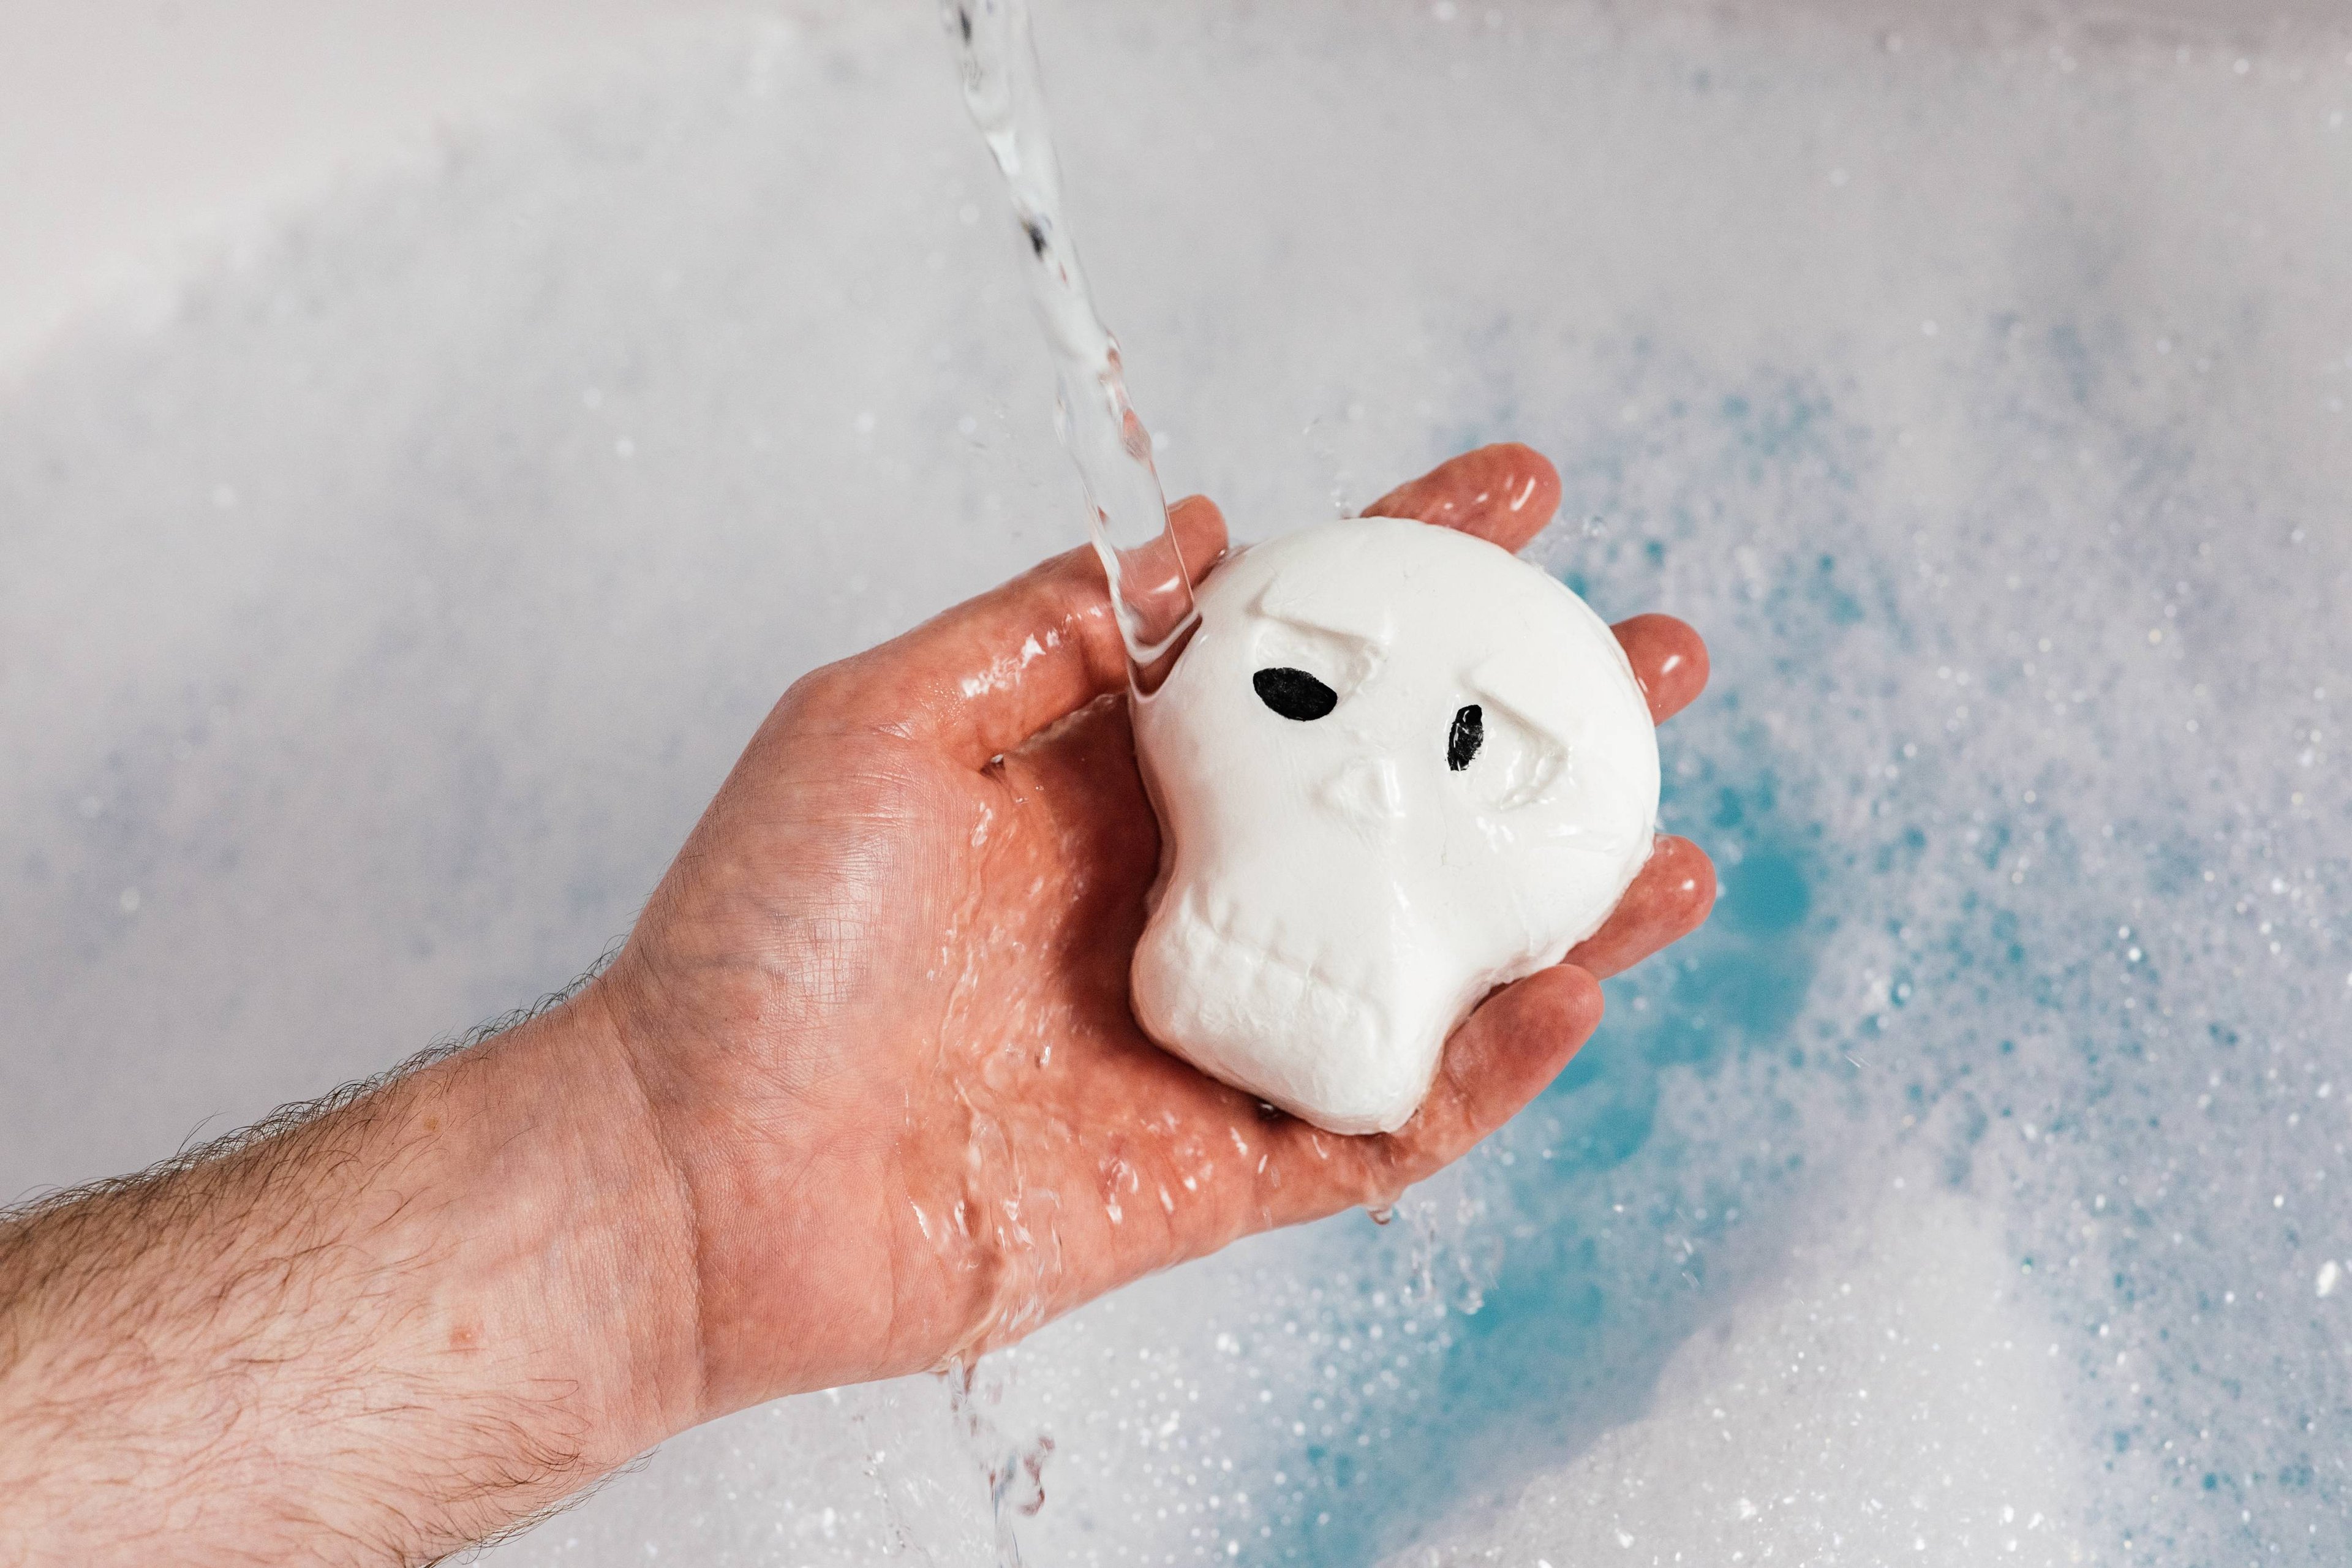 Image shows model holding the bubble bar under running water as it creates a thick blanket of foamy bubbles.